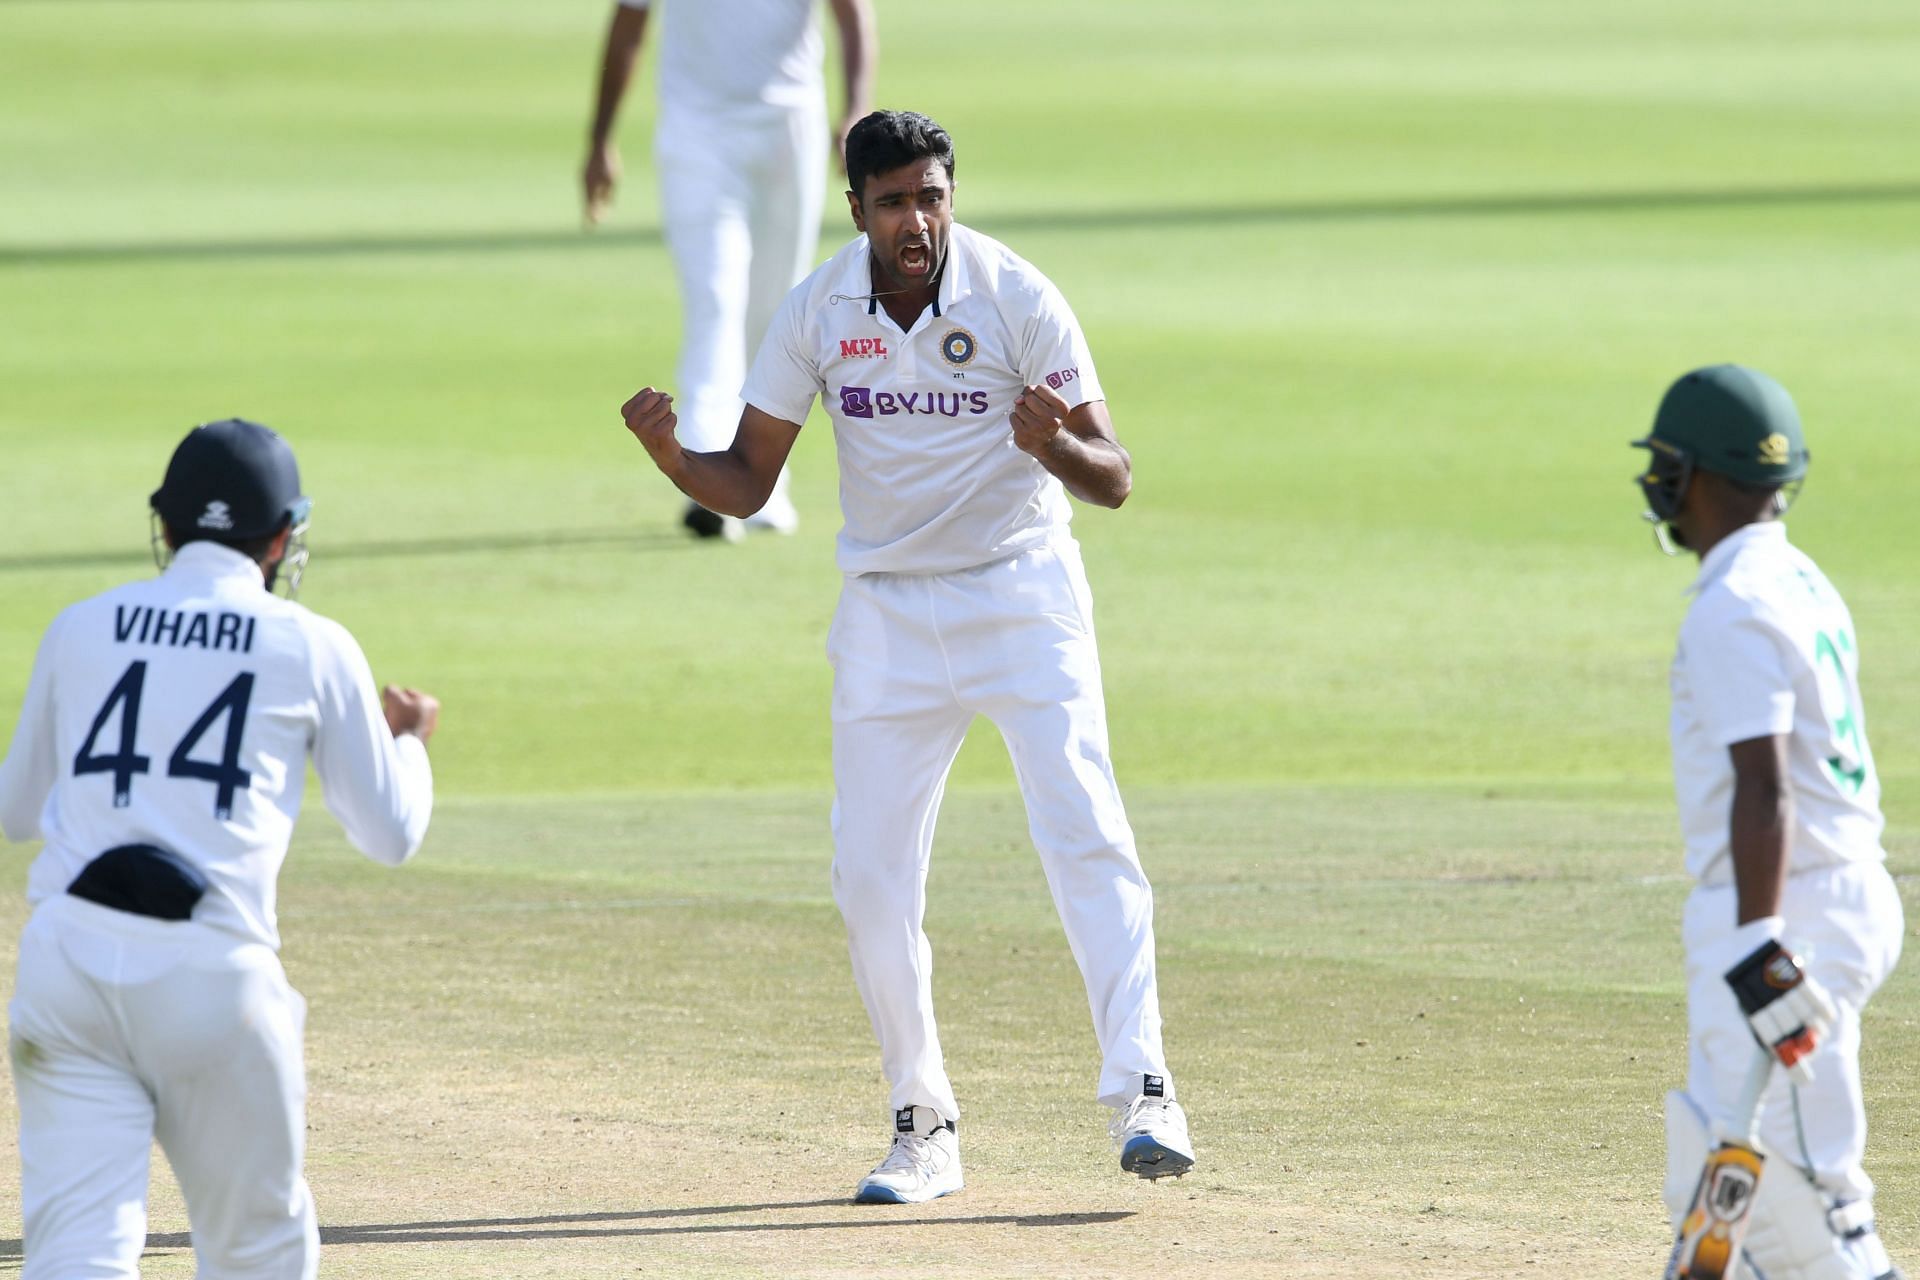 Ashwin has not been too threatening with the ball in both Tests against South Africa